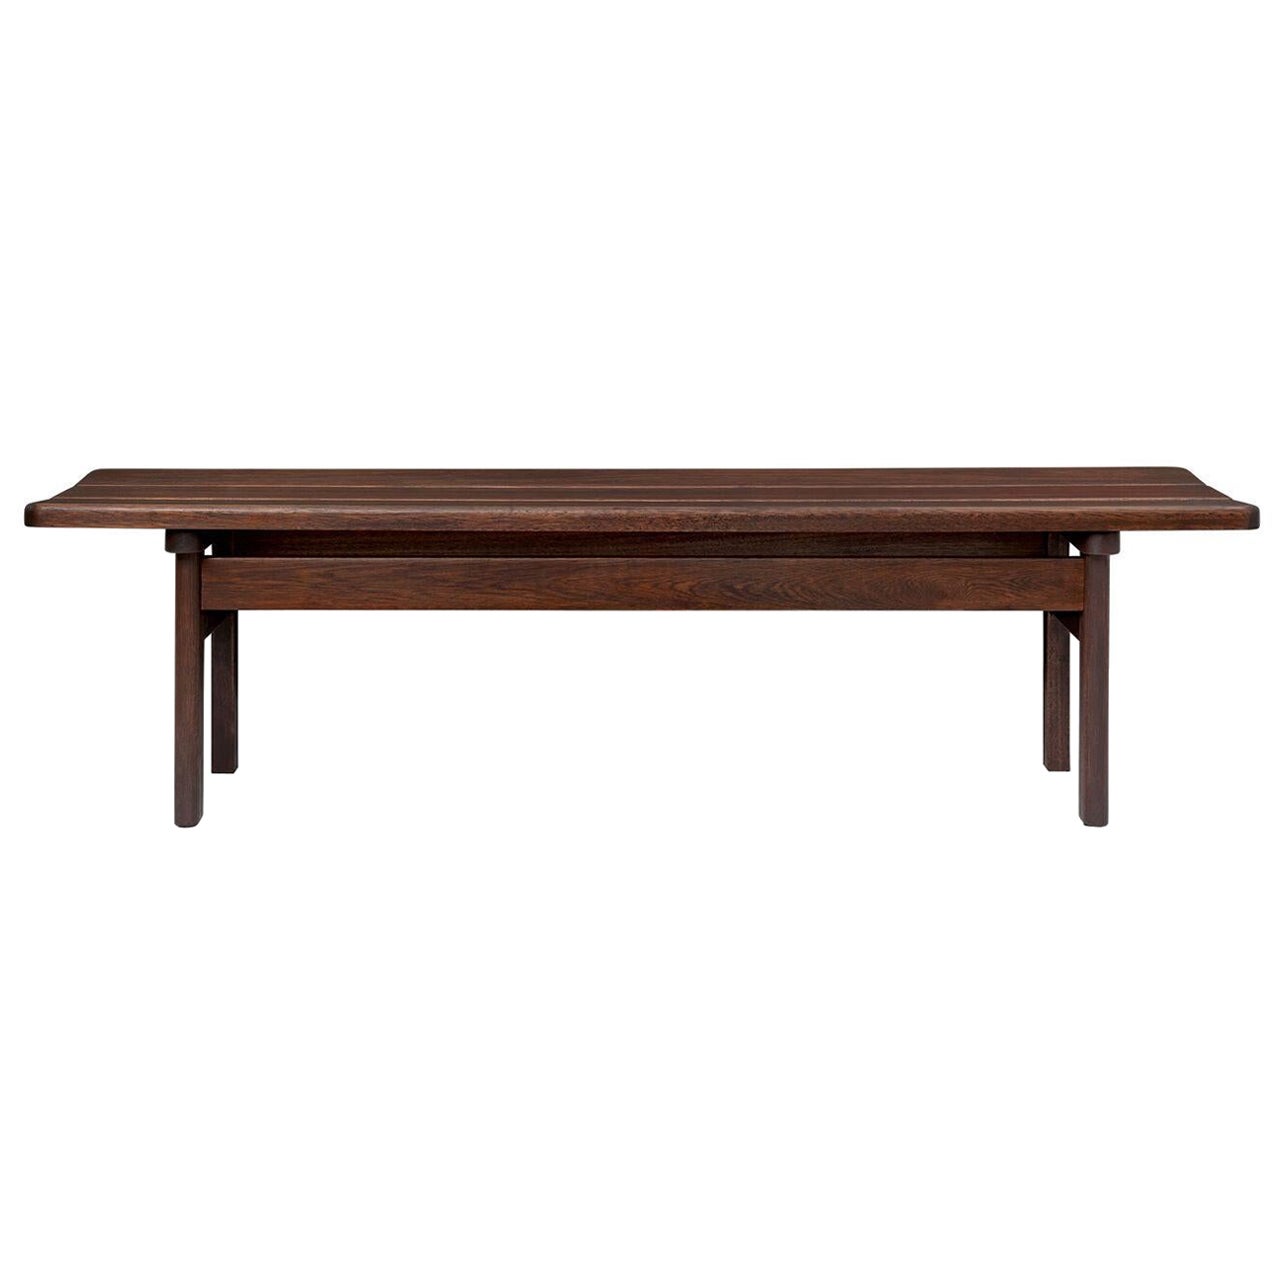 BM0700 Asserbo Backless Bench in Dark Oil Stained Eucalyptus Wood *Quickship* For Sale